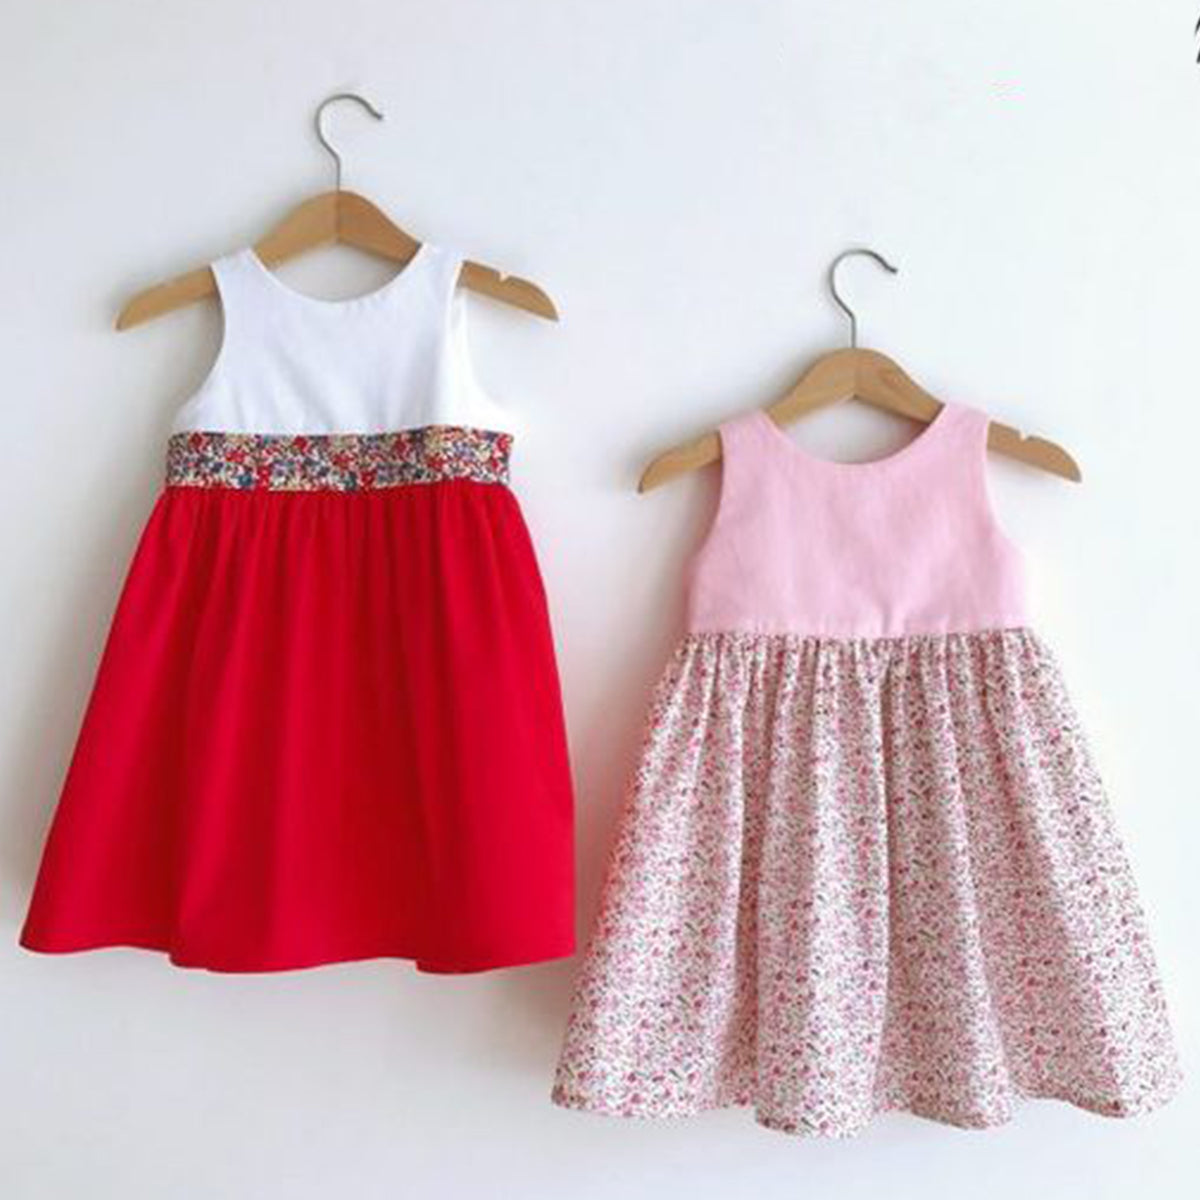 Toddler Girl's Designers Cotton Dresses_Frocks Combo Pack Of 3 for Babydoll,